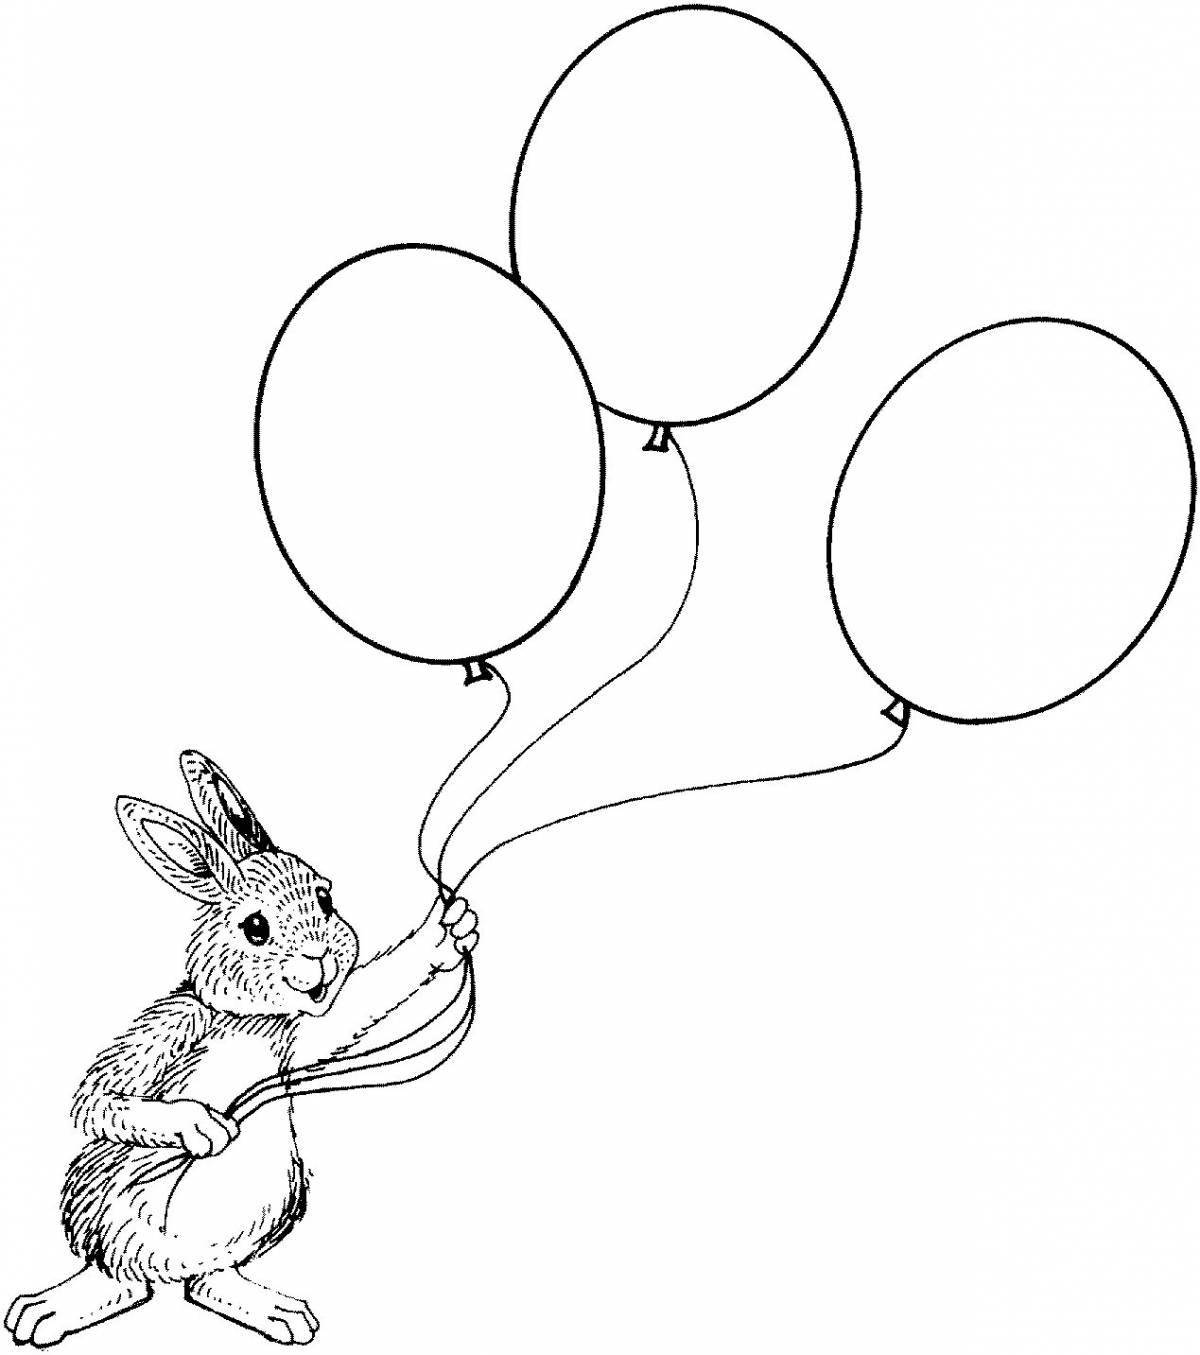 Fun coloring book with balloons for 3-4 year olds